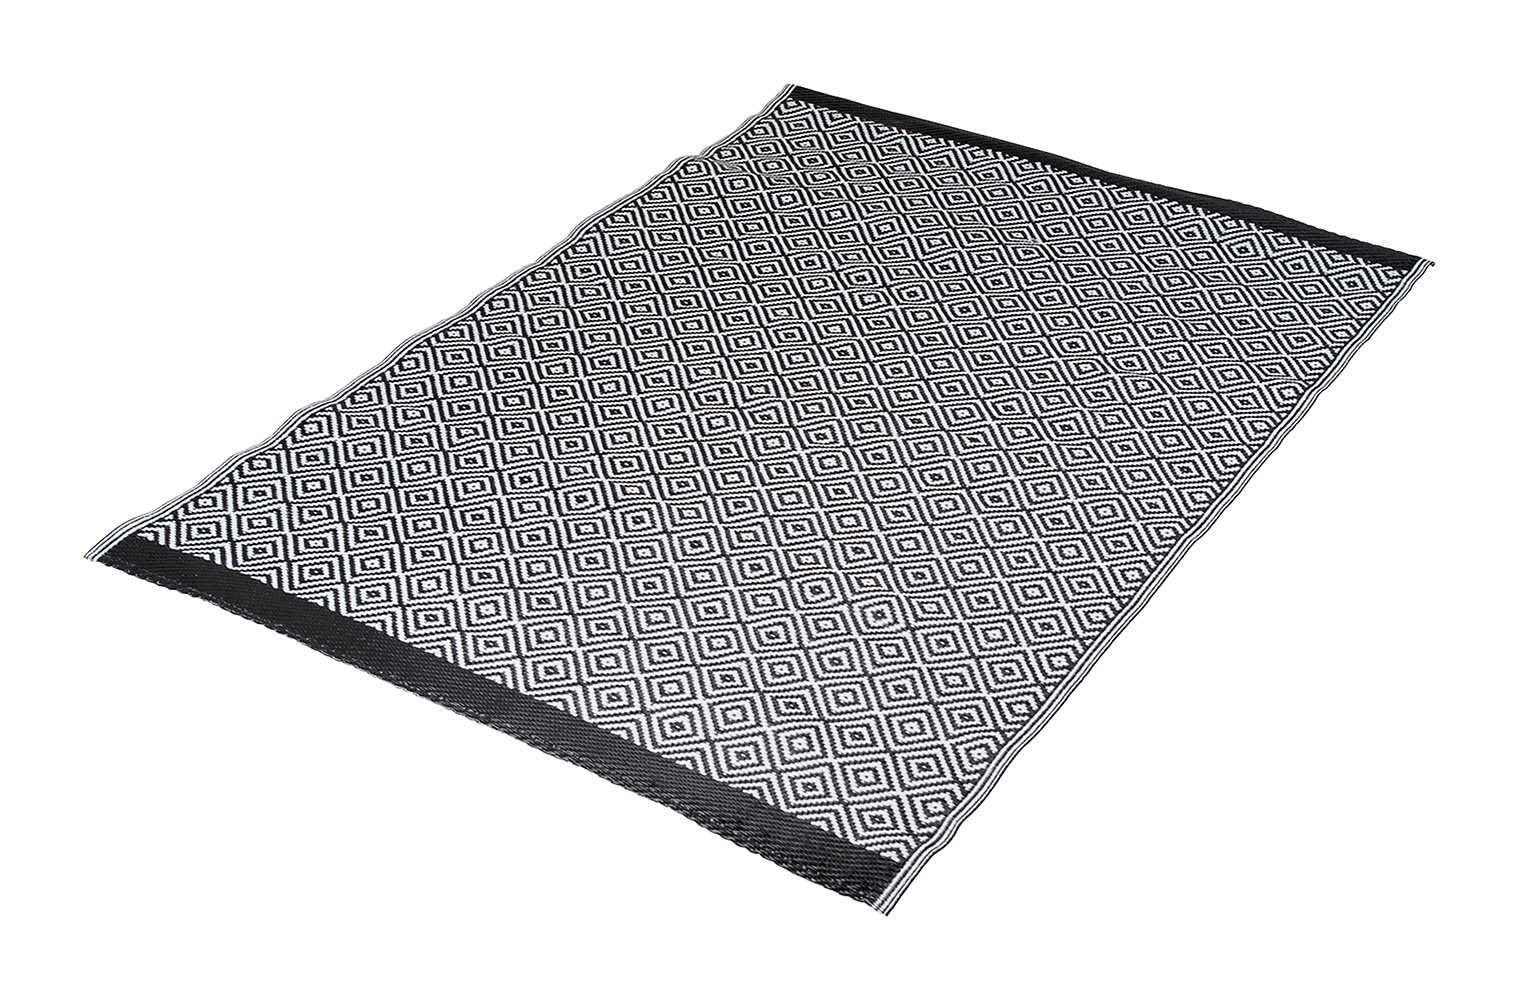 Bo-Camp - Urban Outdoor collection - Chill mat - Kingston - Beach - Black/White